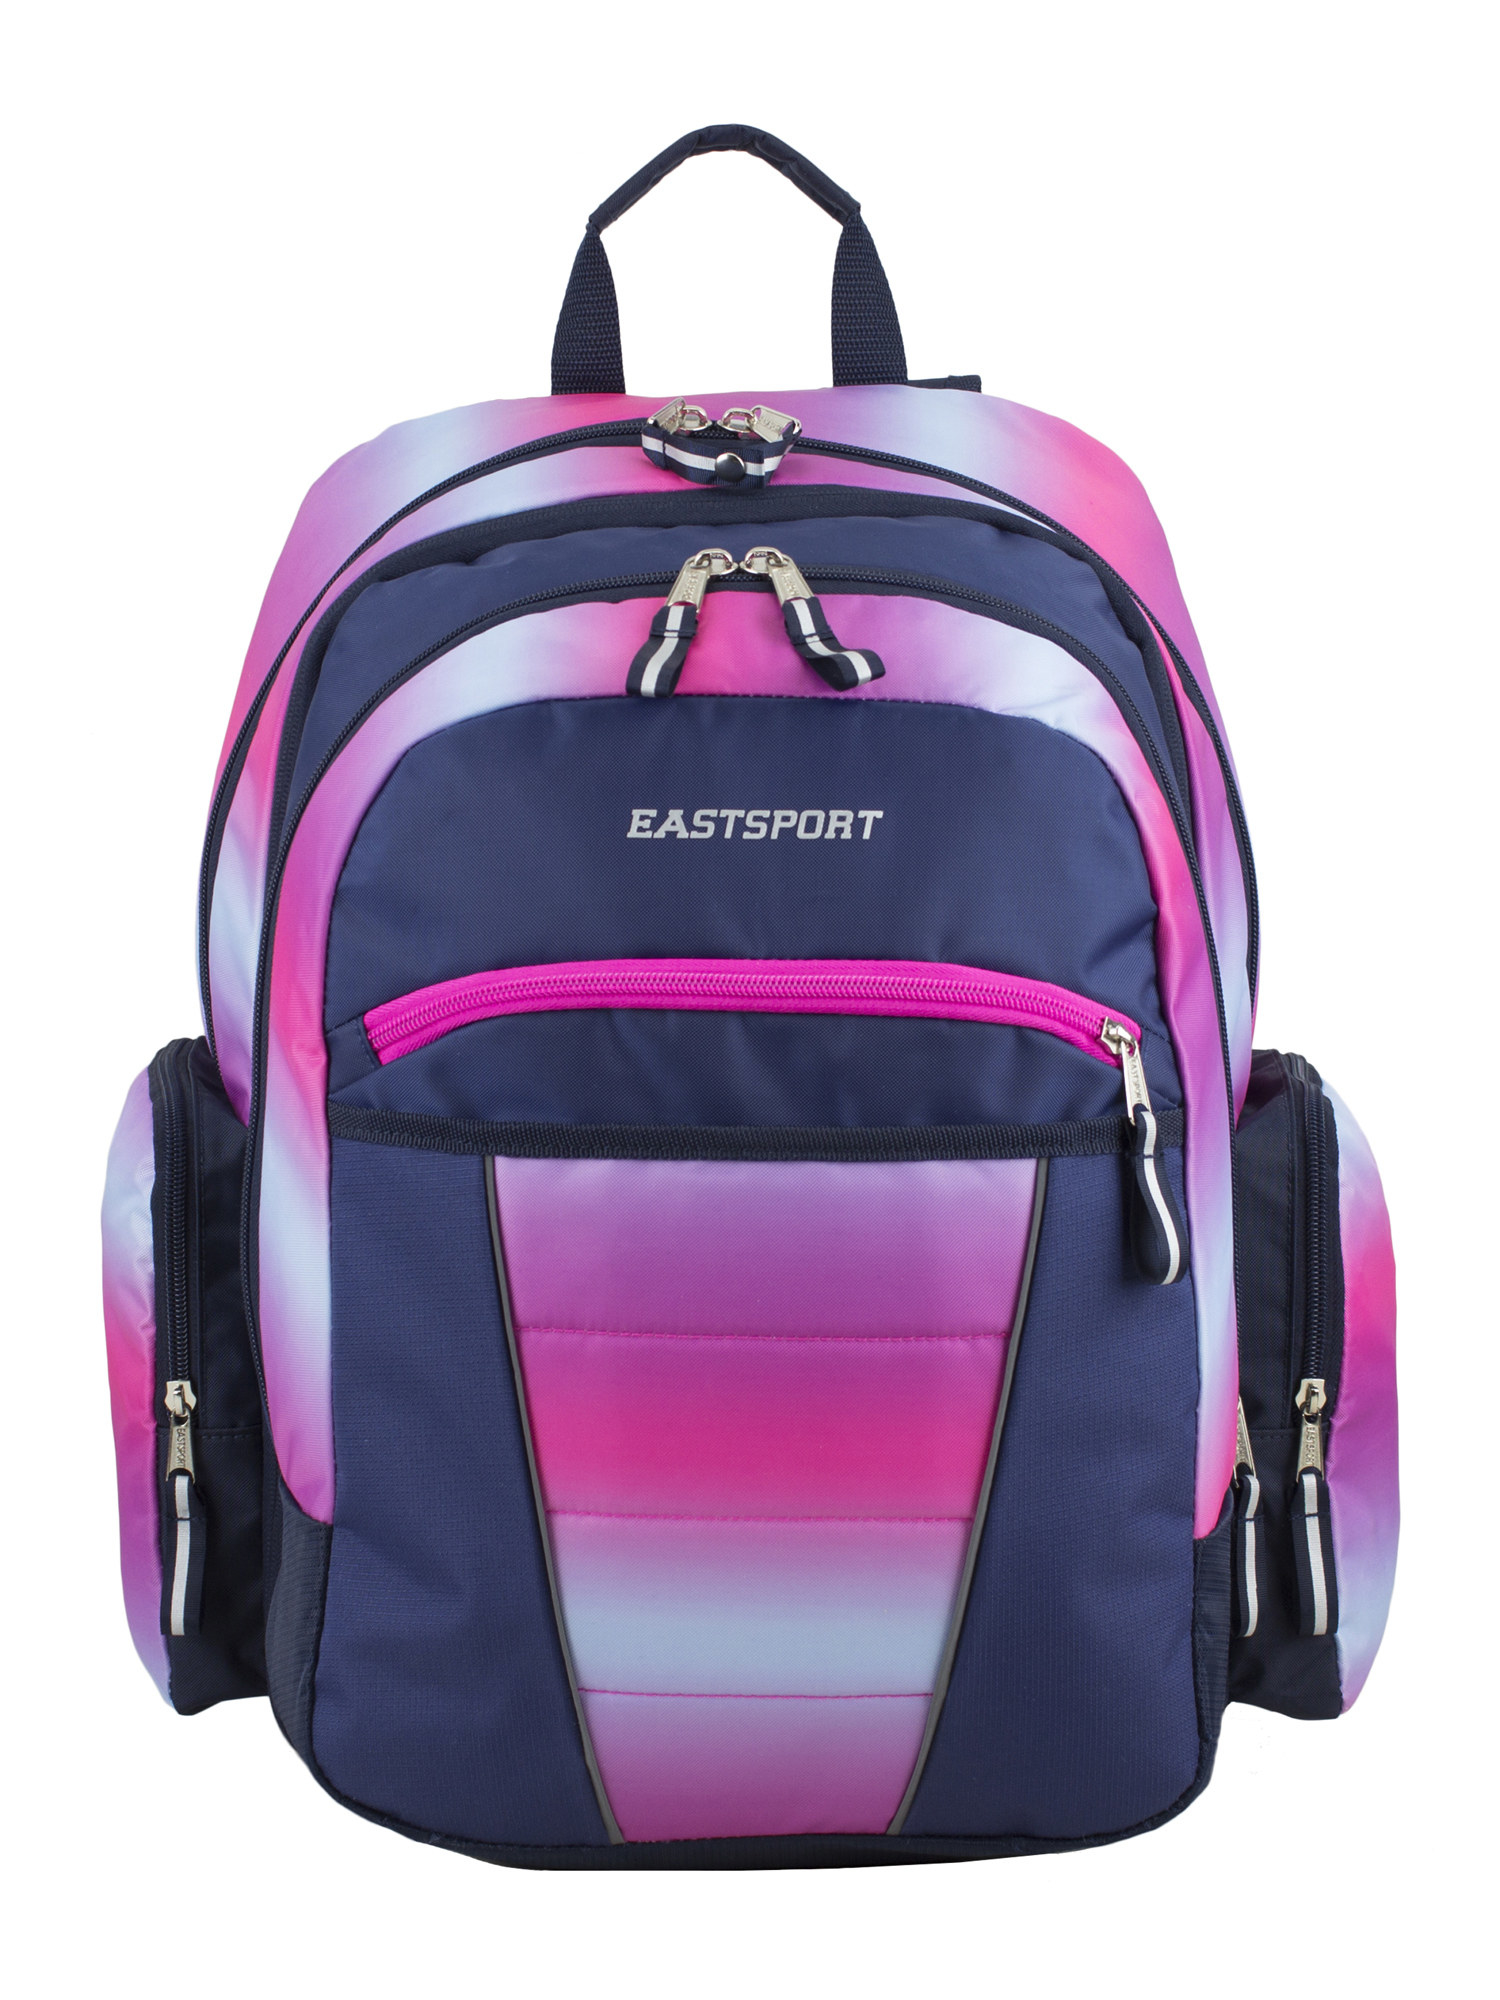 25 Stylish Backpacks You Can Get At Walmart